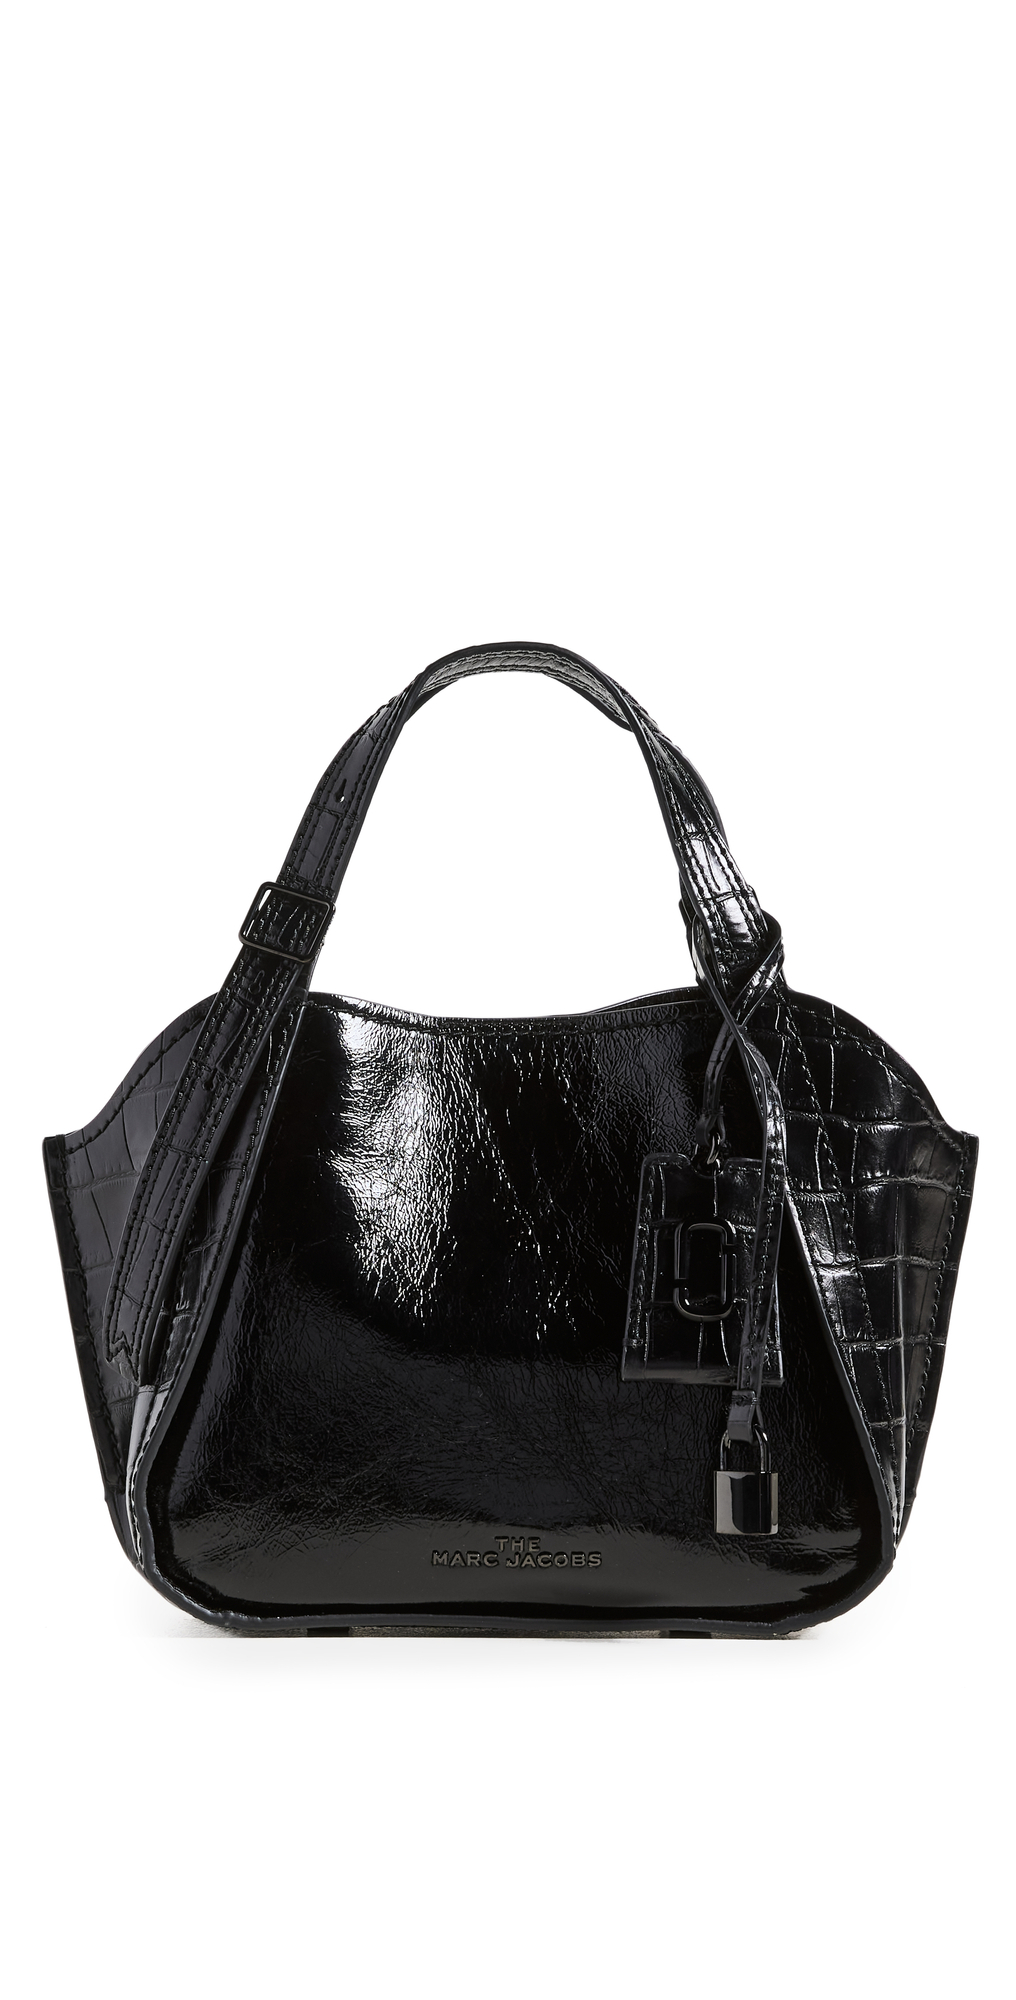 Marc Jacobs The Mini Director Tote in black